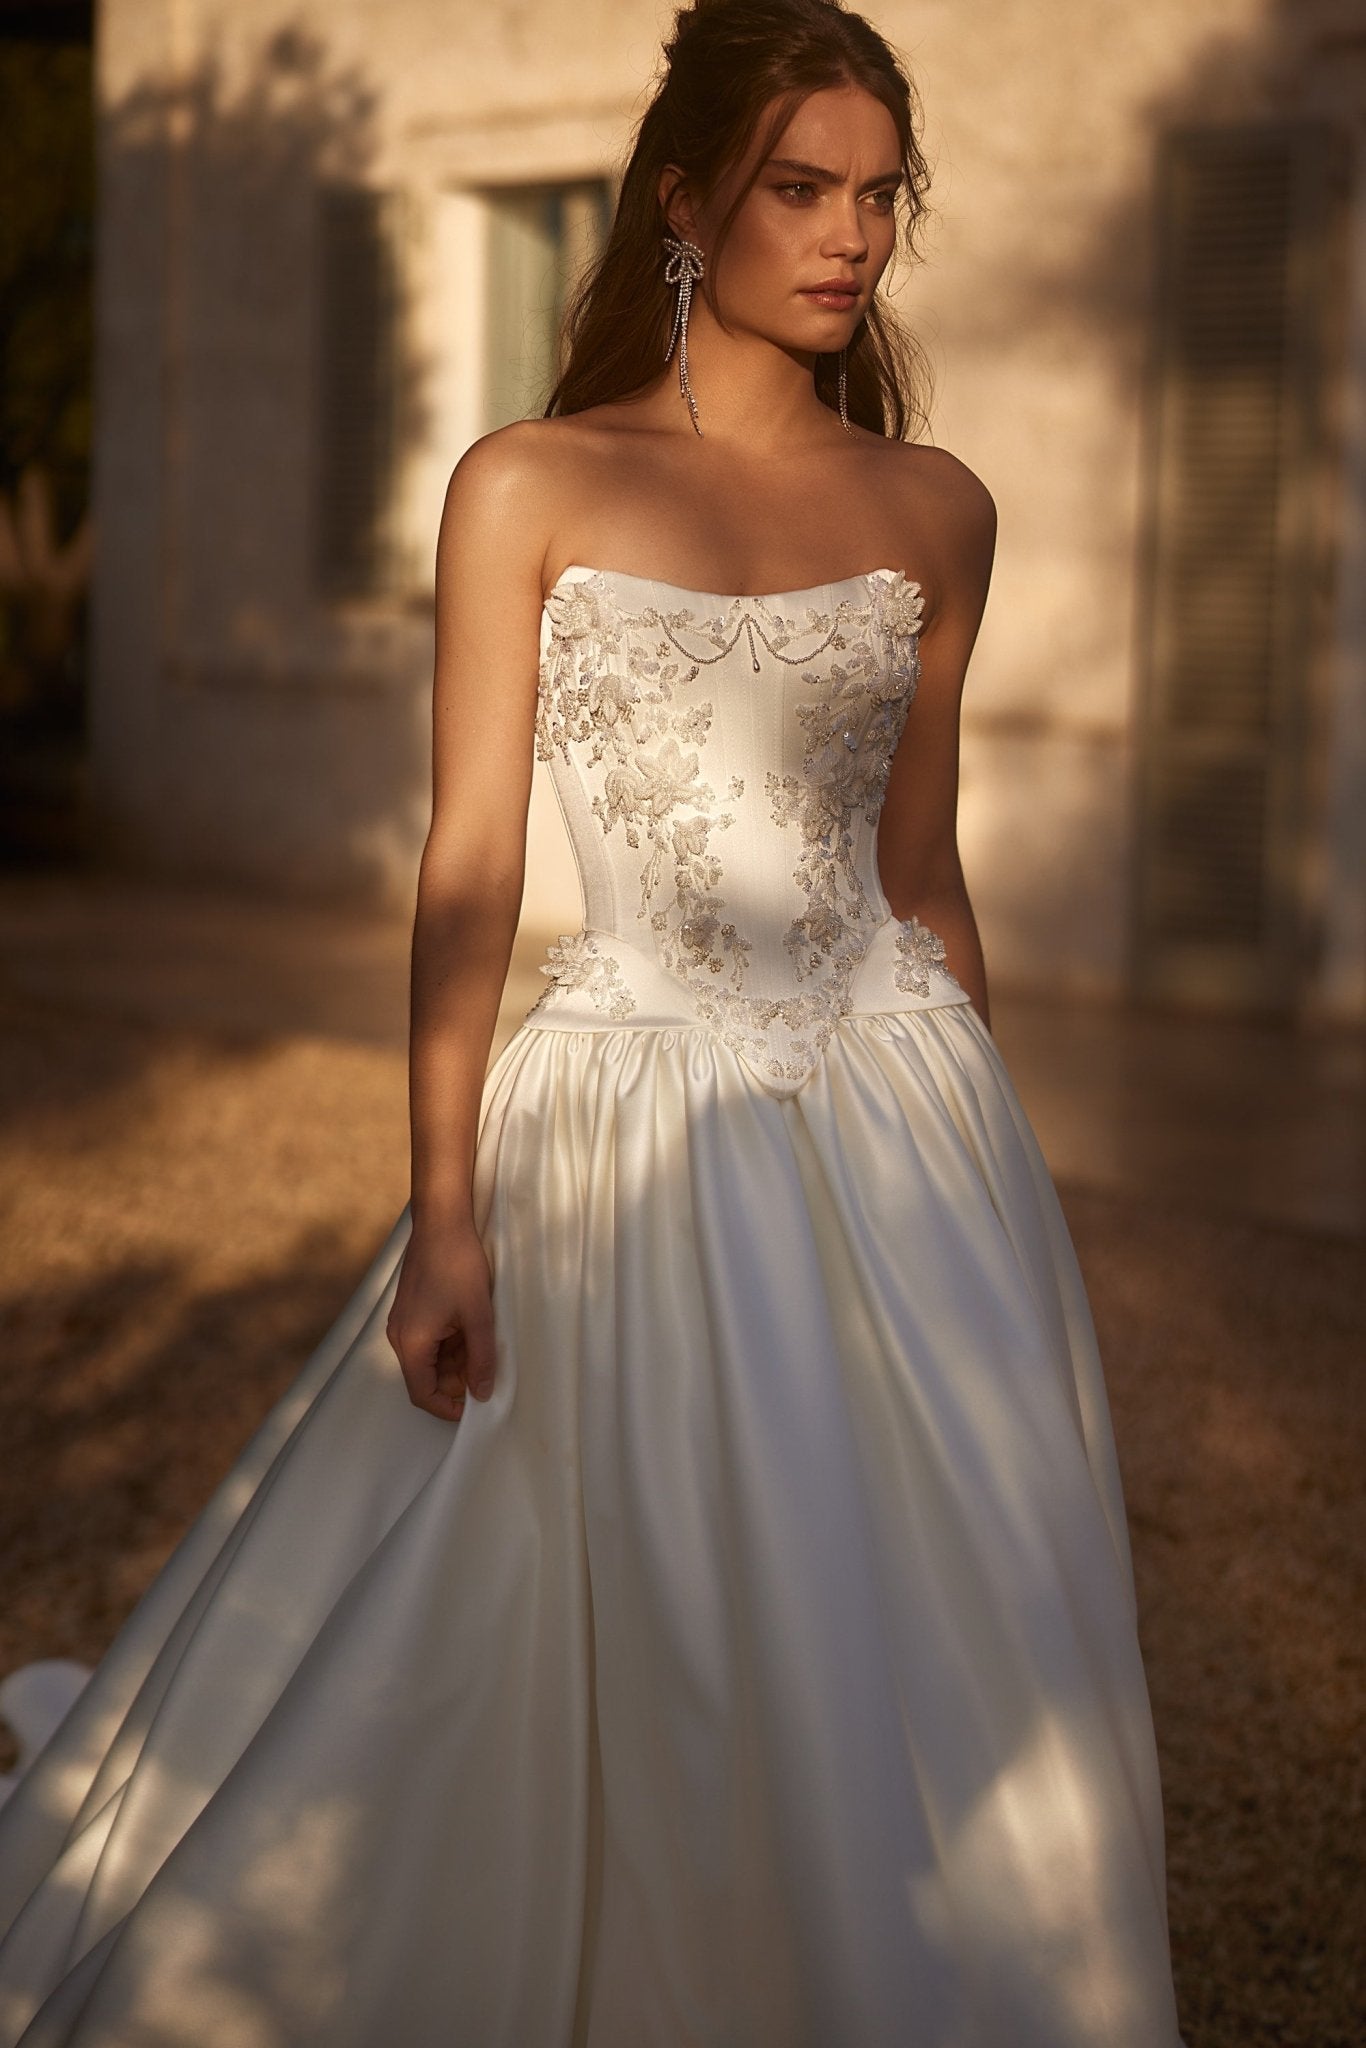 Exquisite Satin Strapless Wedding Gown with Luxury Lace-Up Corset and Embroidered Train Plus Size - WonderlandByLilian